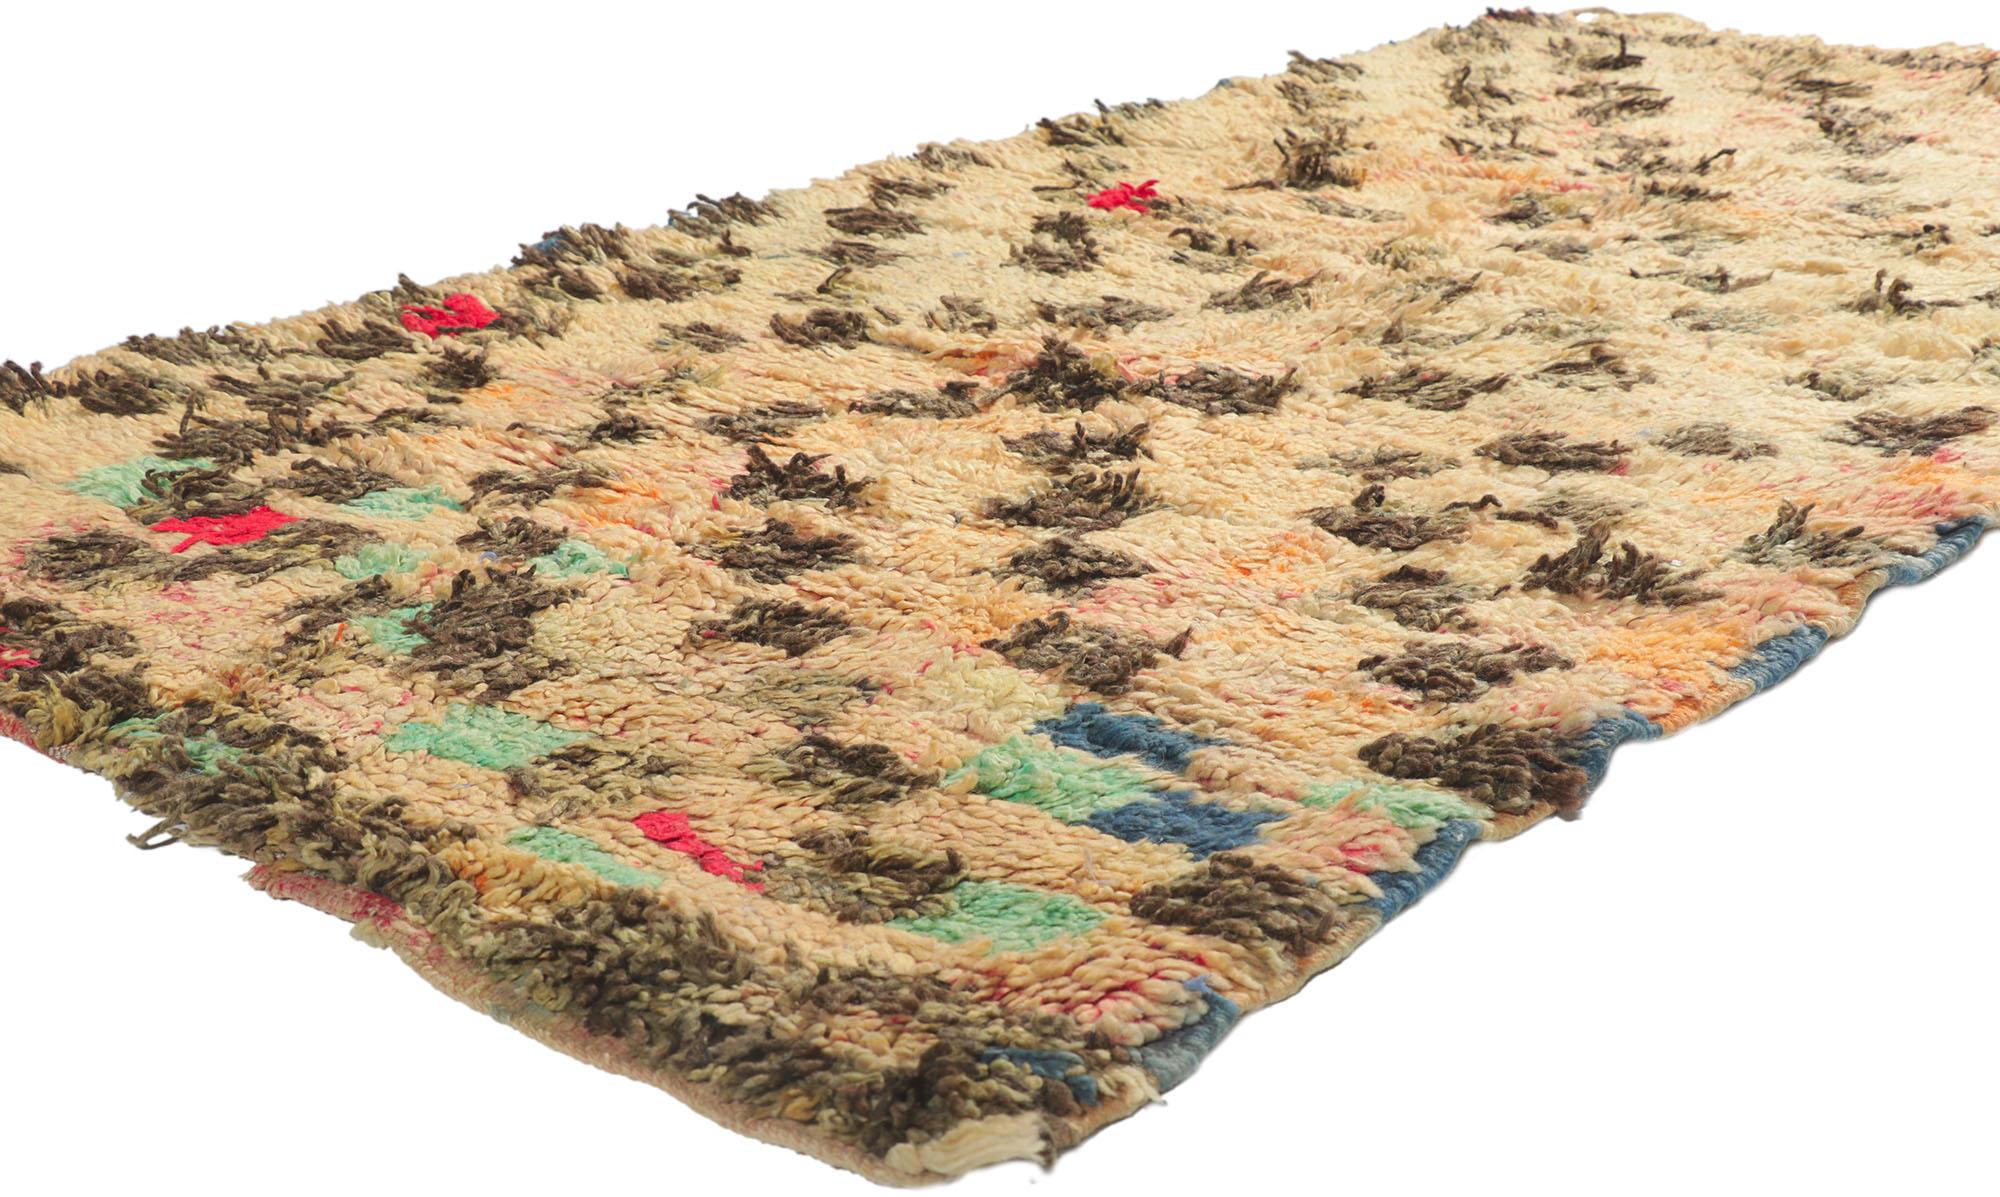 21608 Vintage Berber Moroccan Rug, 03'09 x 06'10. Showcasing an expressive design, incredible detail and texture, this hand knotted wool vintage Berber Moroccan rug is a captivating vision of woven beauty. The eye-catching checkered pattern and